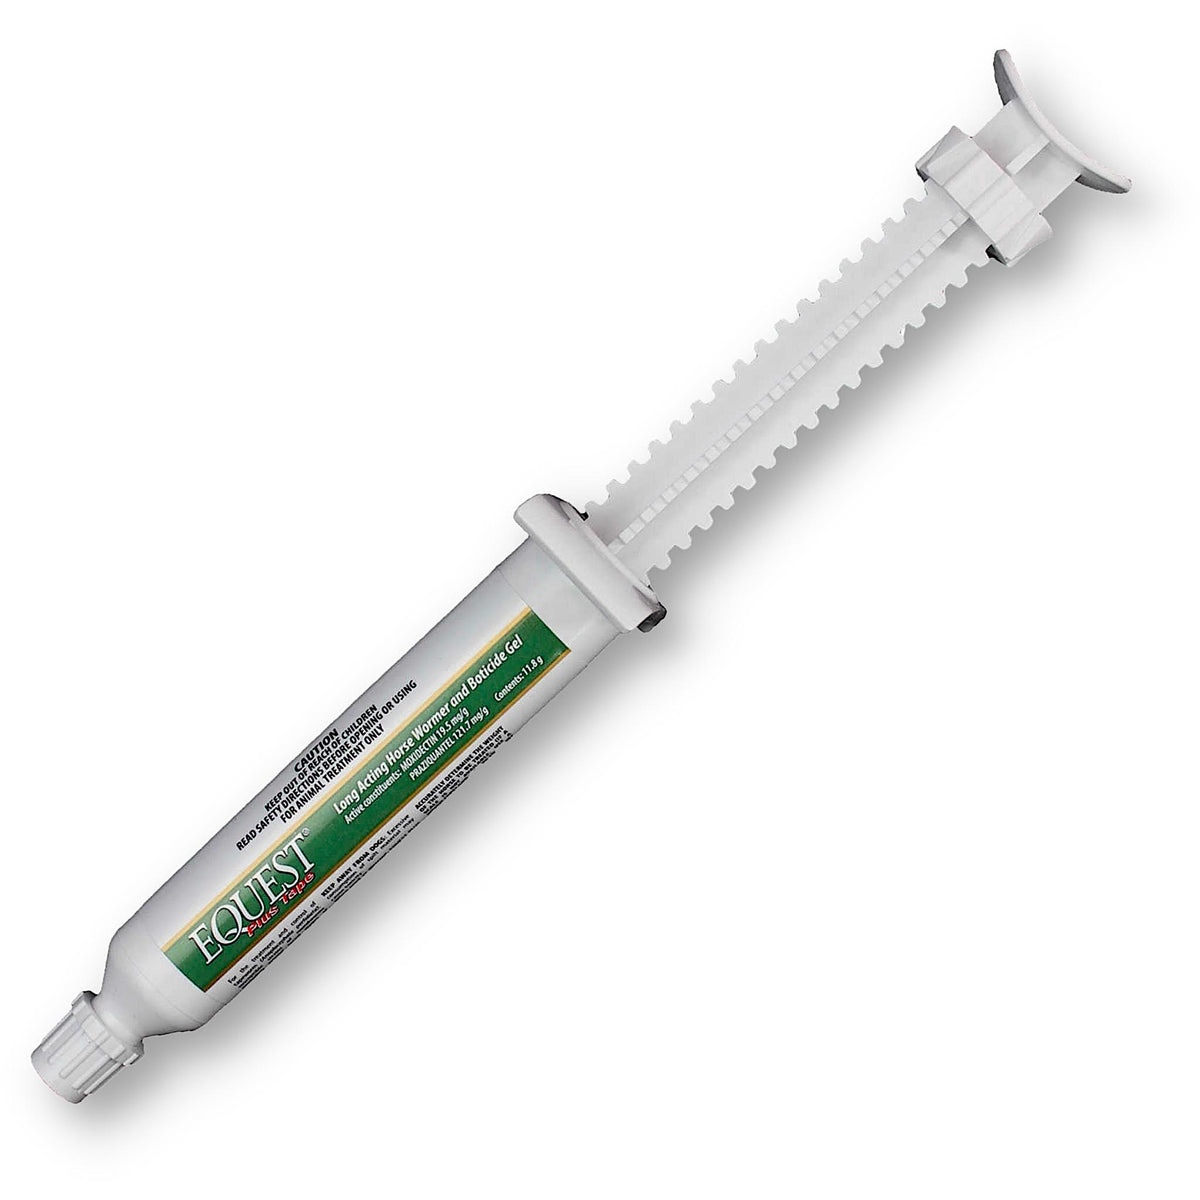 White syringe tube of product with cap on end, and green label.